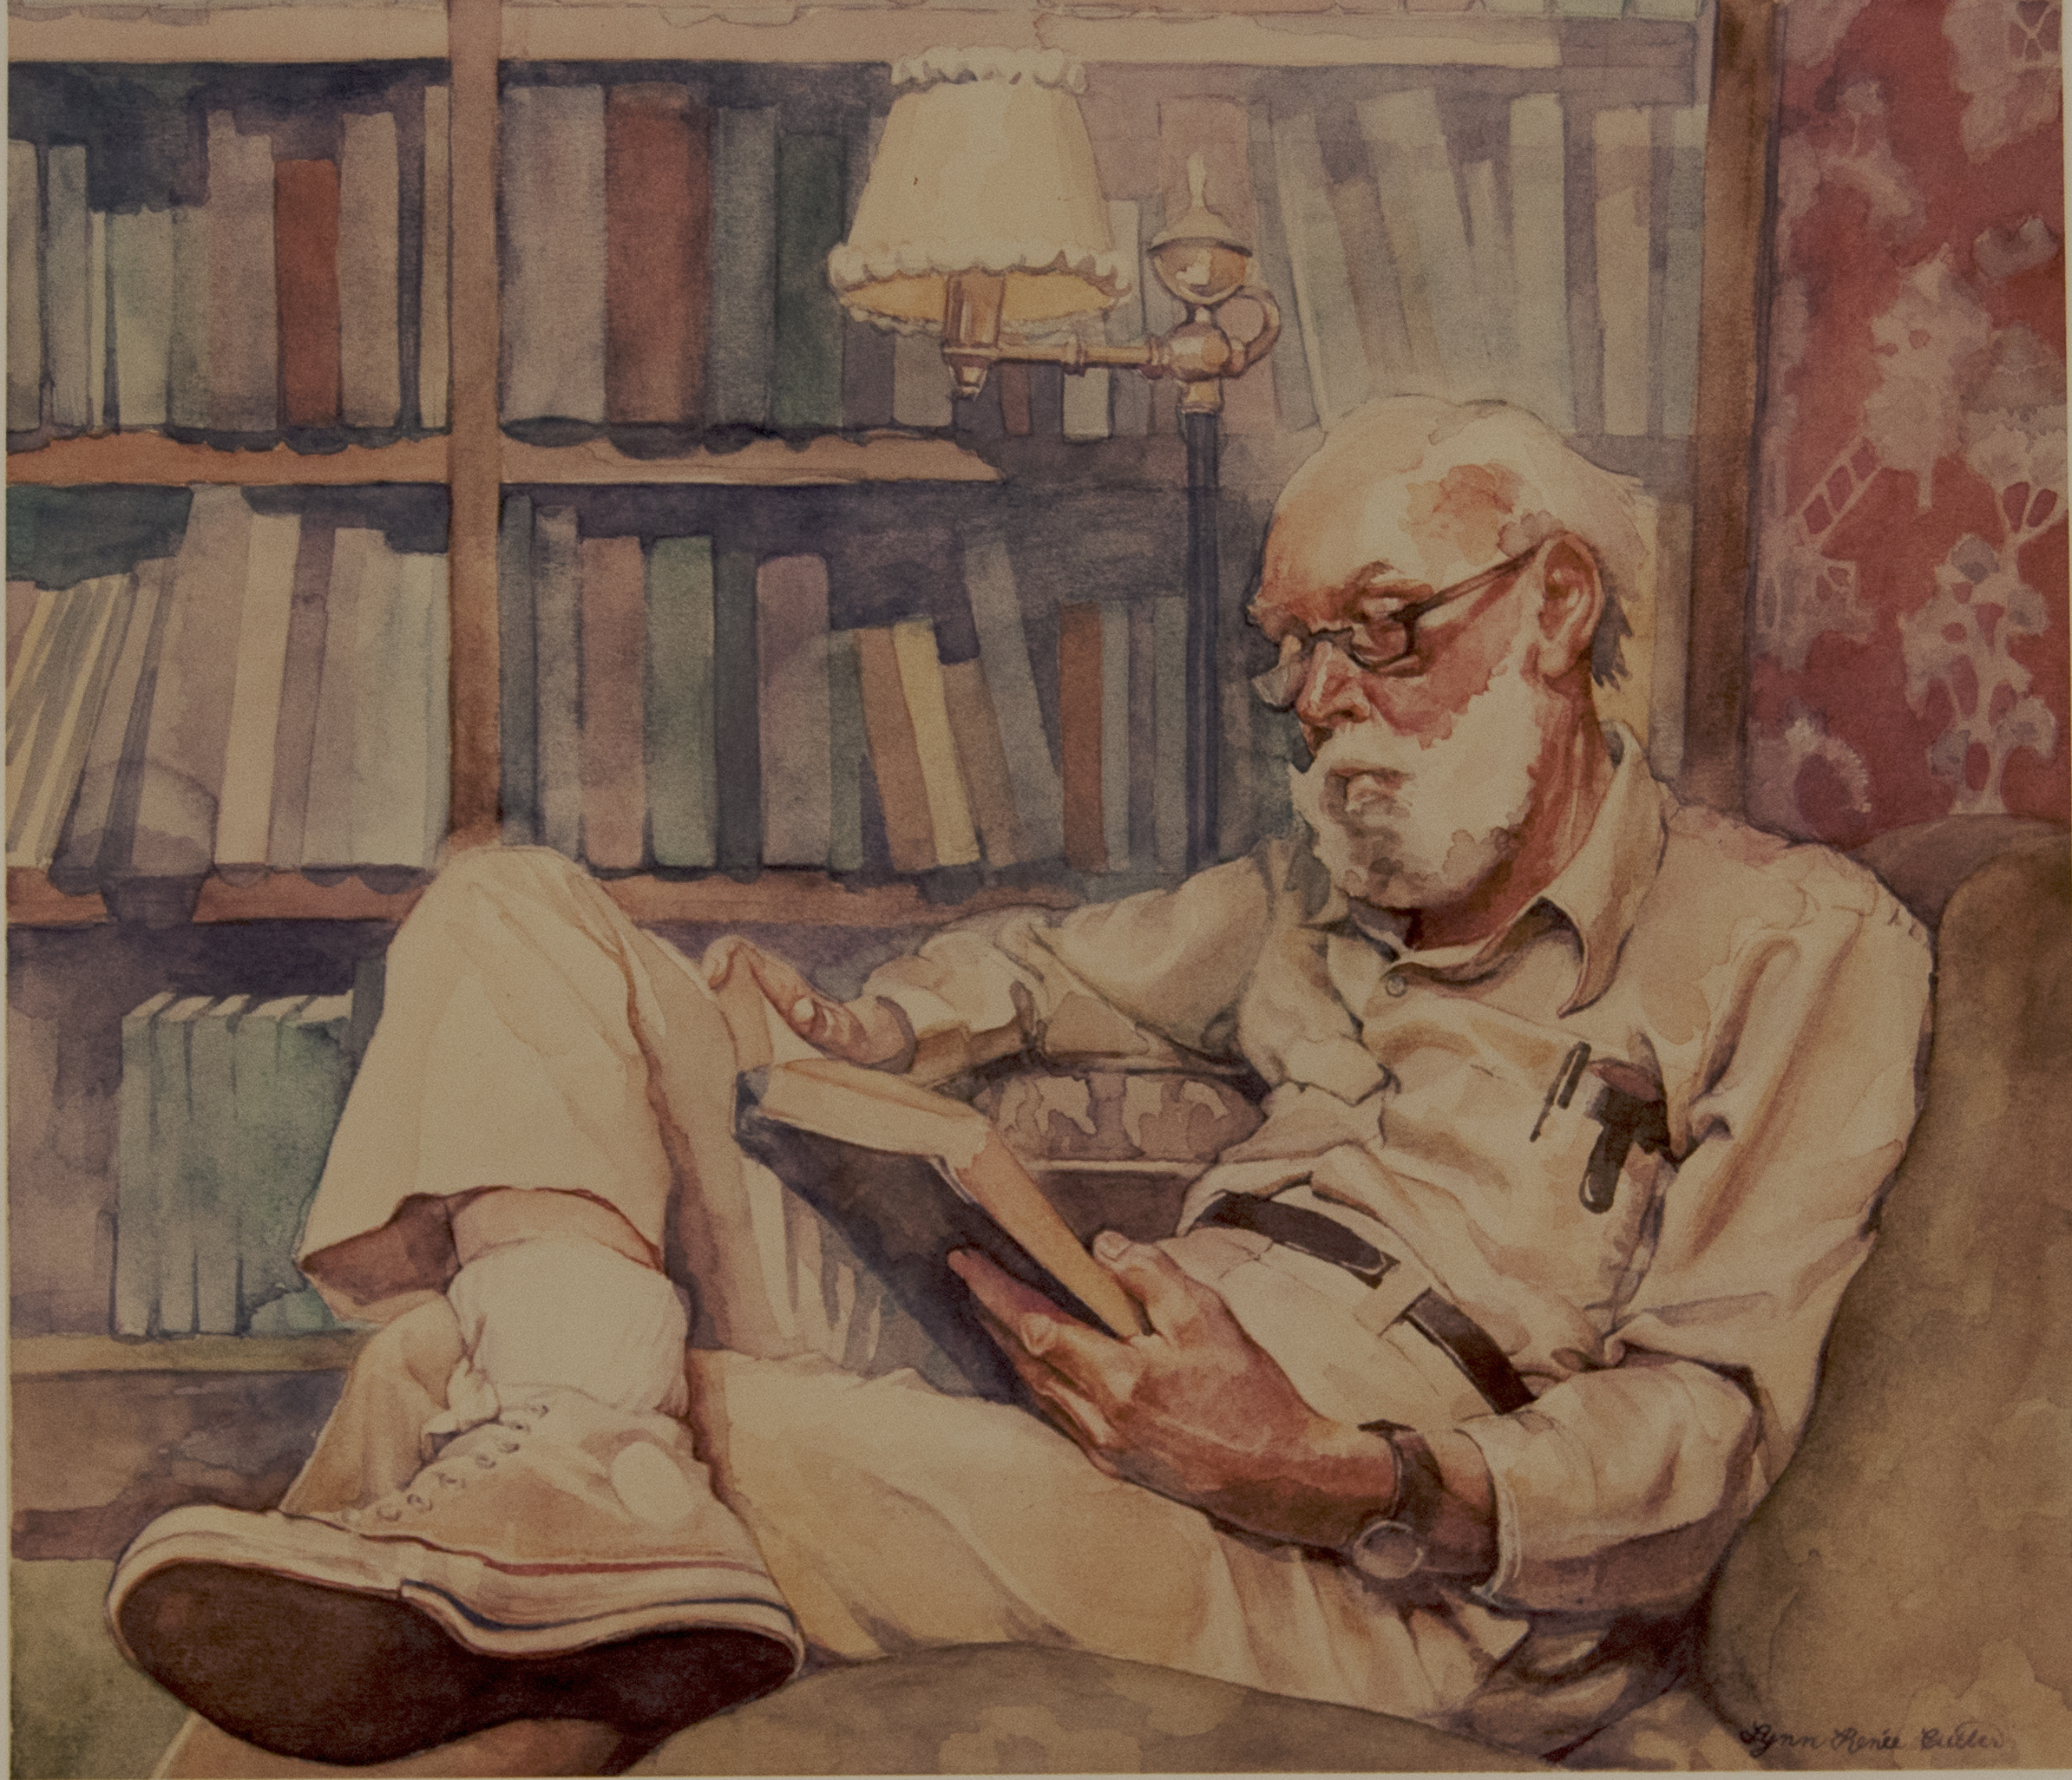 Lynn Sanguedolce, "Old Man Reading," 12 x 16 inches